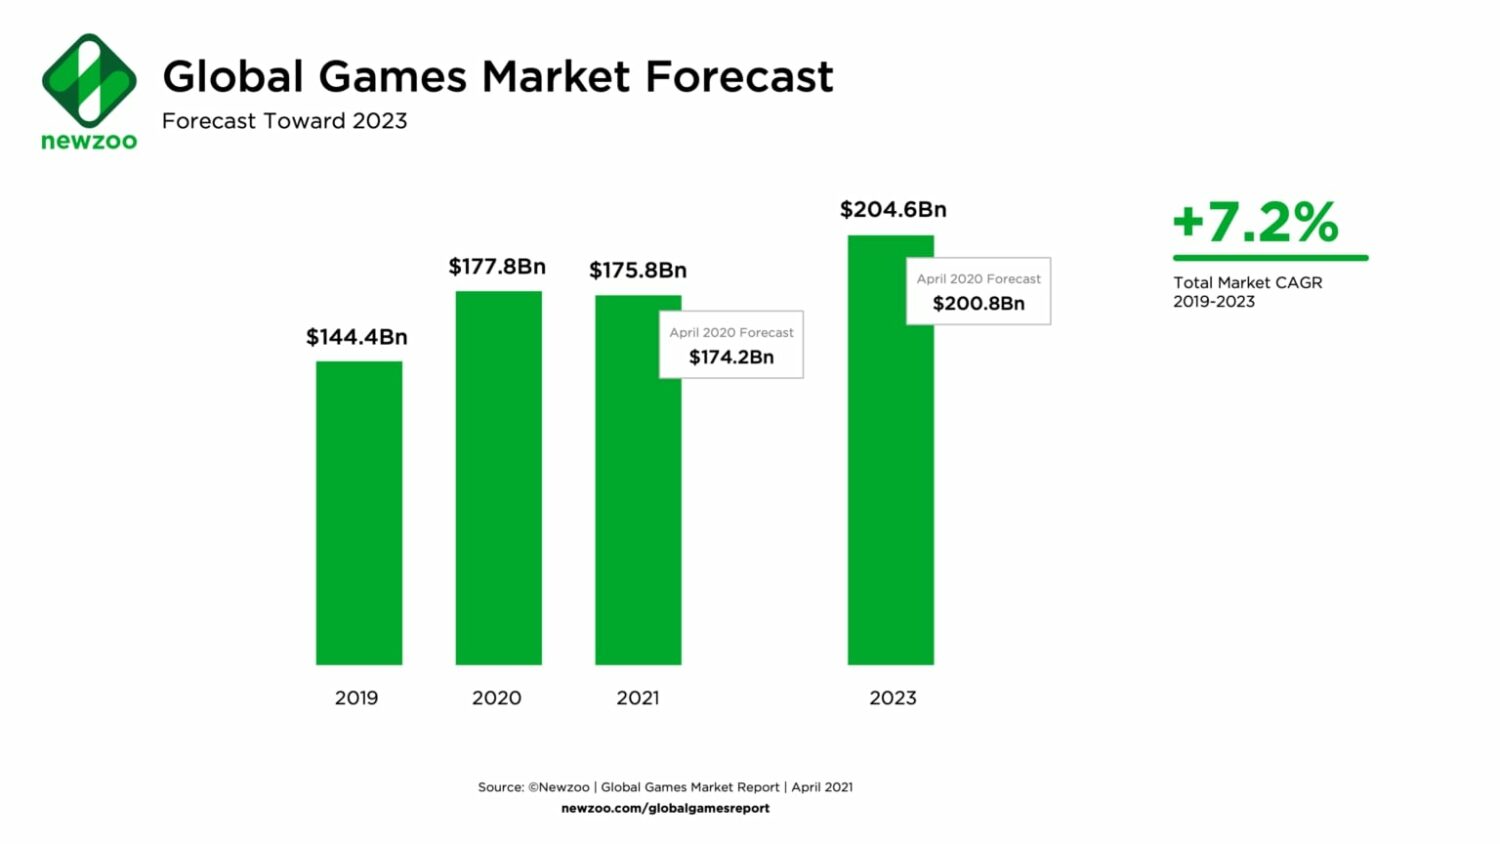 Global Mobile Games revenue in 2021 will cross 90 Billion, reports Newzoo